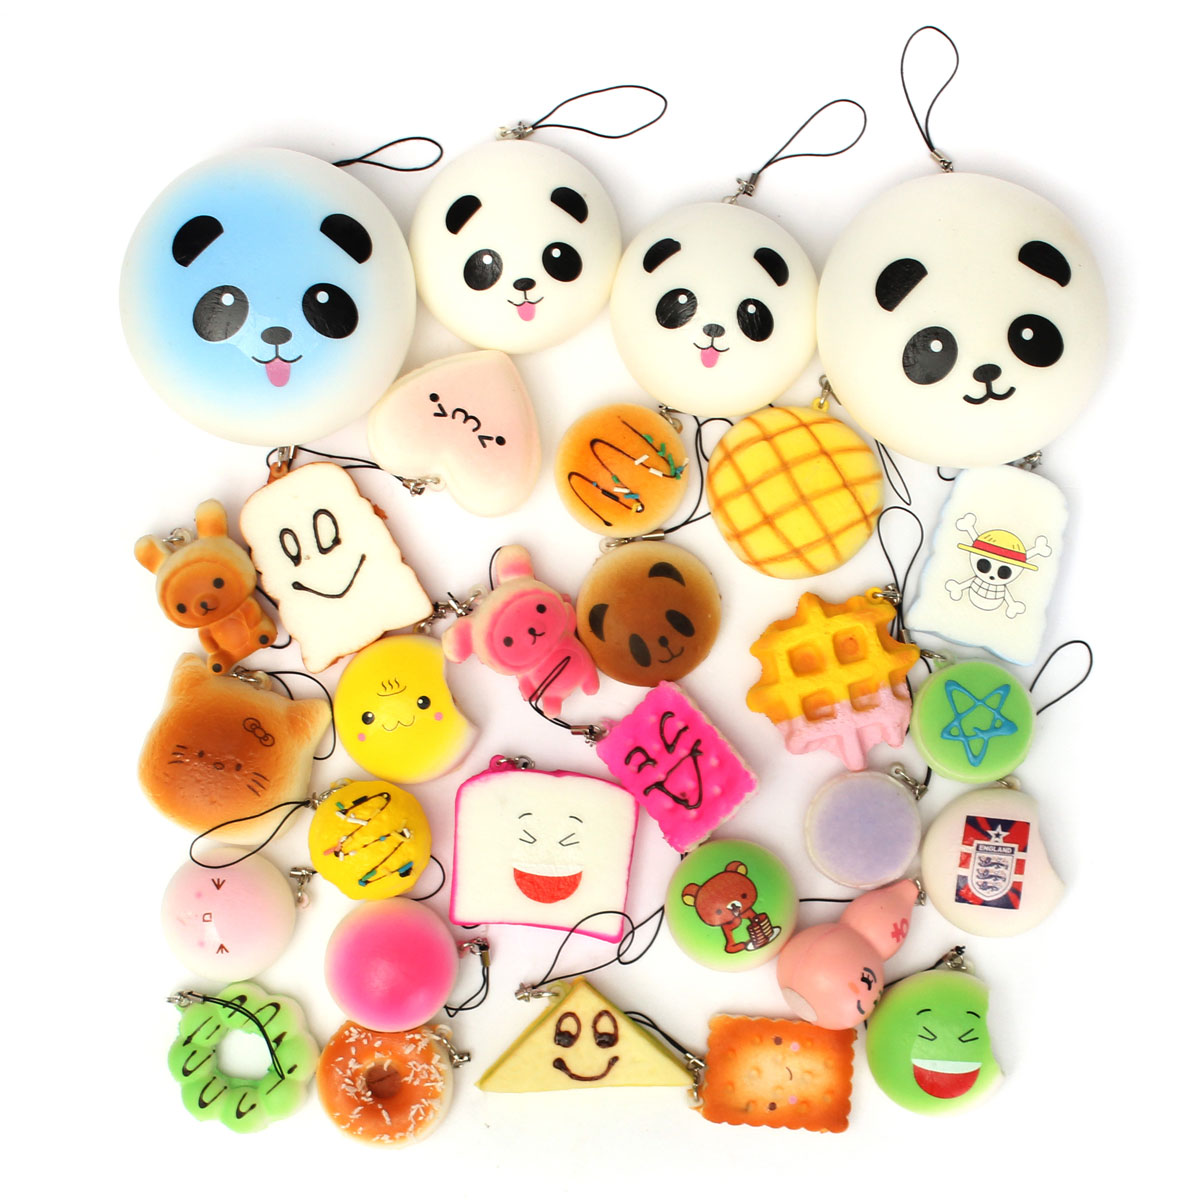 18PCS-Squishy-Christmas-Gift-Decor-Panda-Cup-Cake-Toasts-Buns-Donuts-Random-Soft-Cell-Phone-Straps-1069615-2